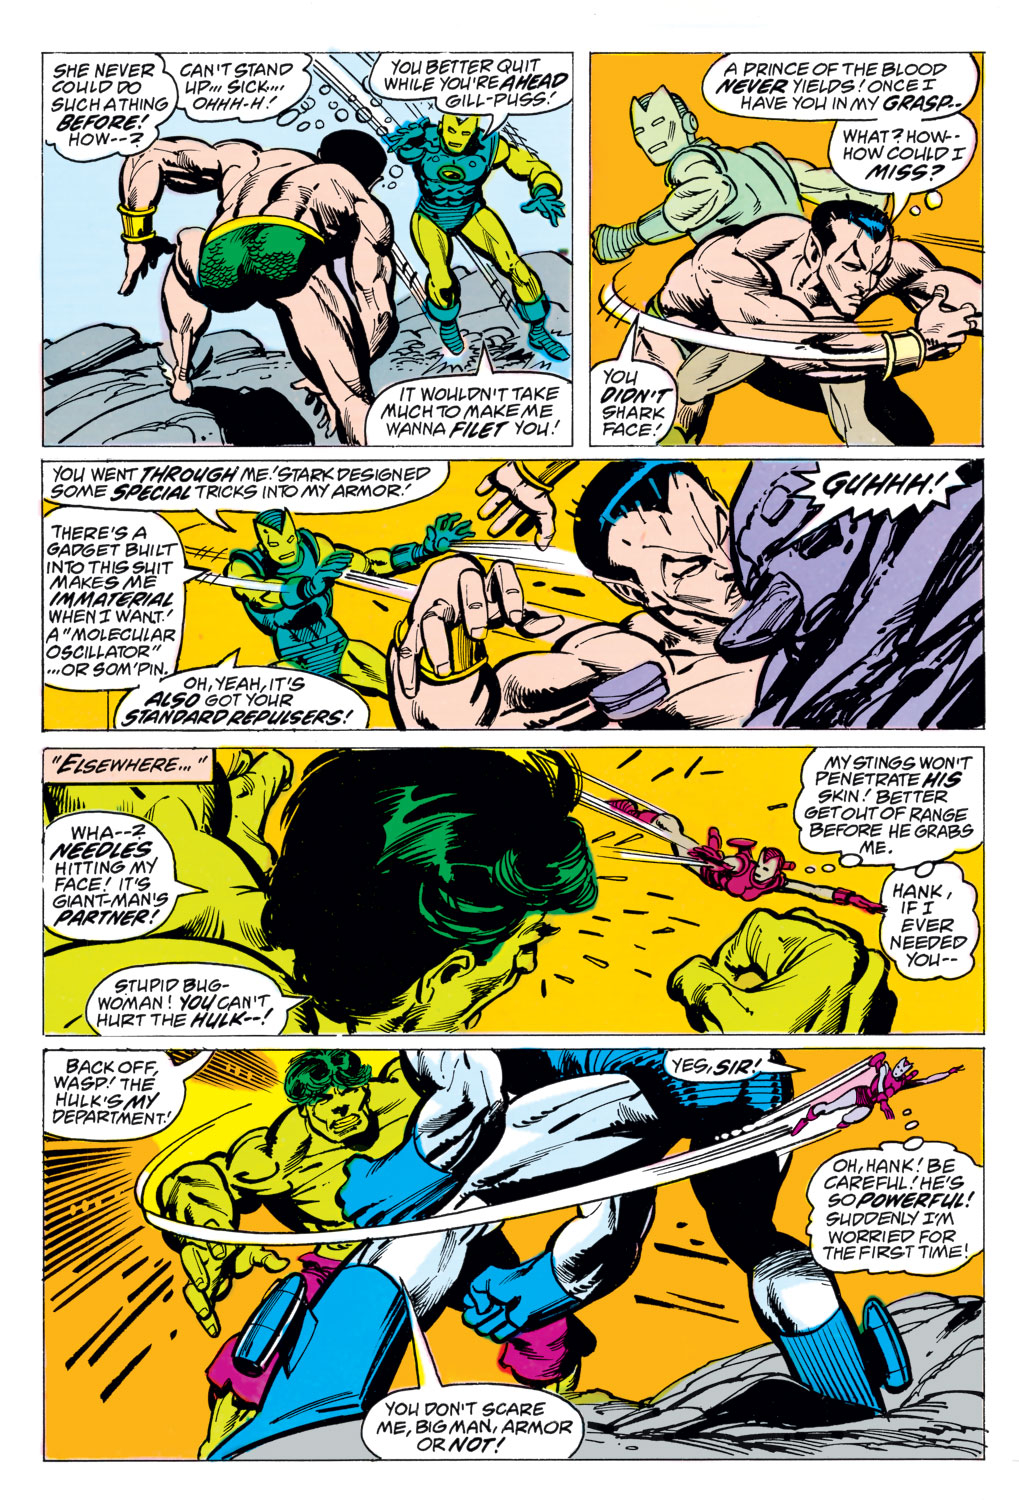 What If? (1977) issue 3 - The Avengers had never been - Page 25